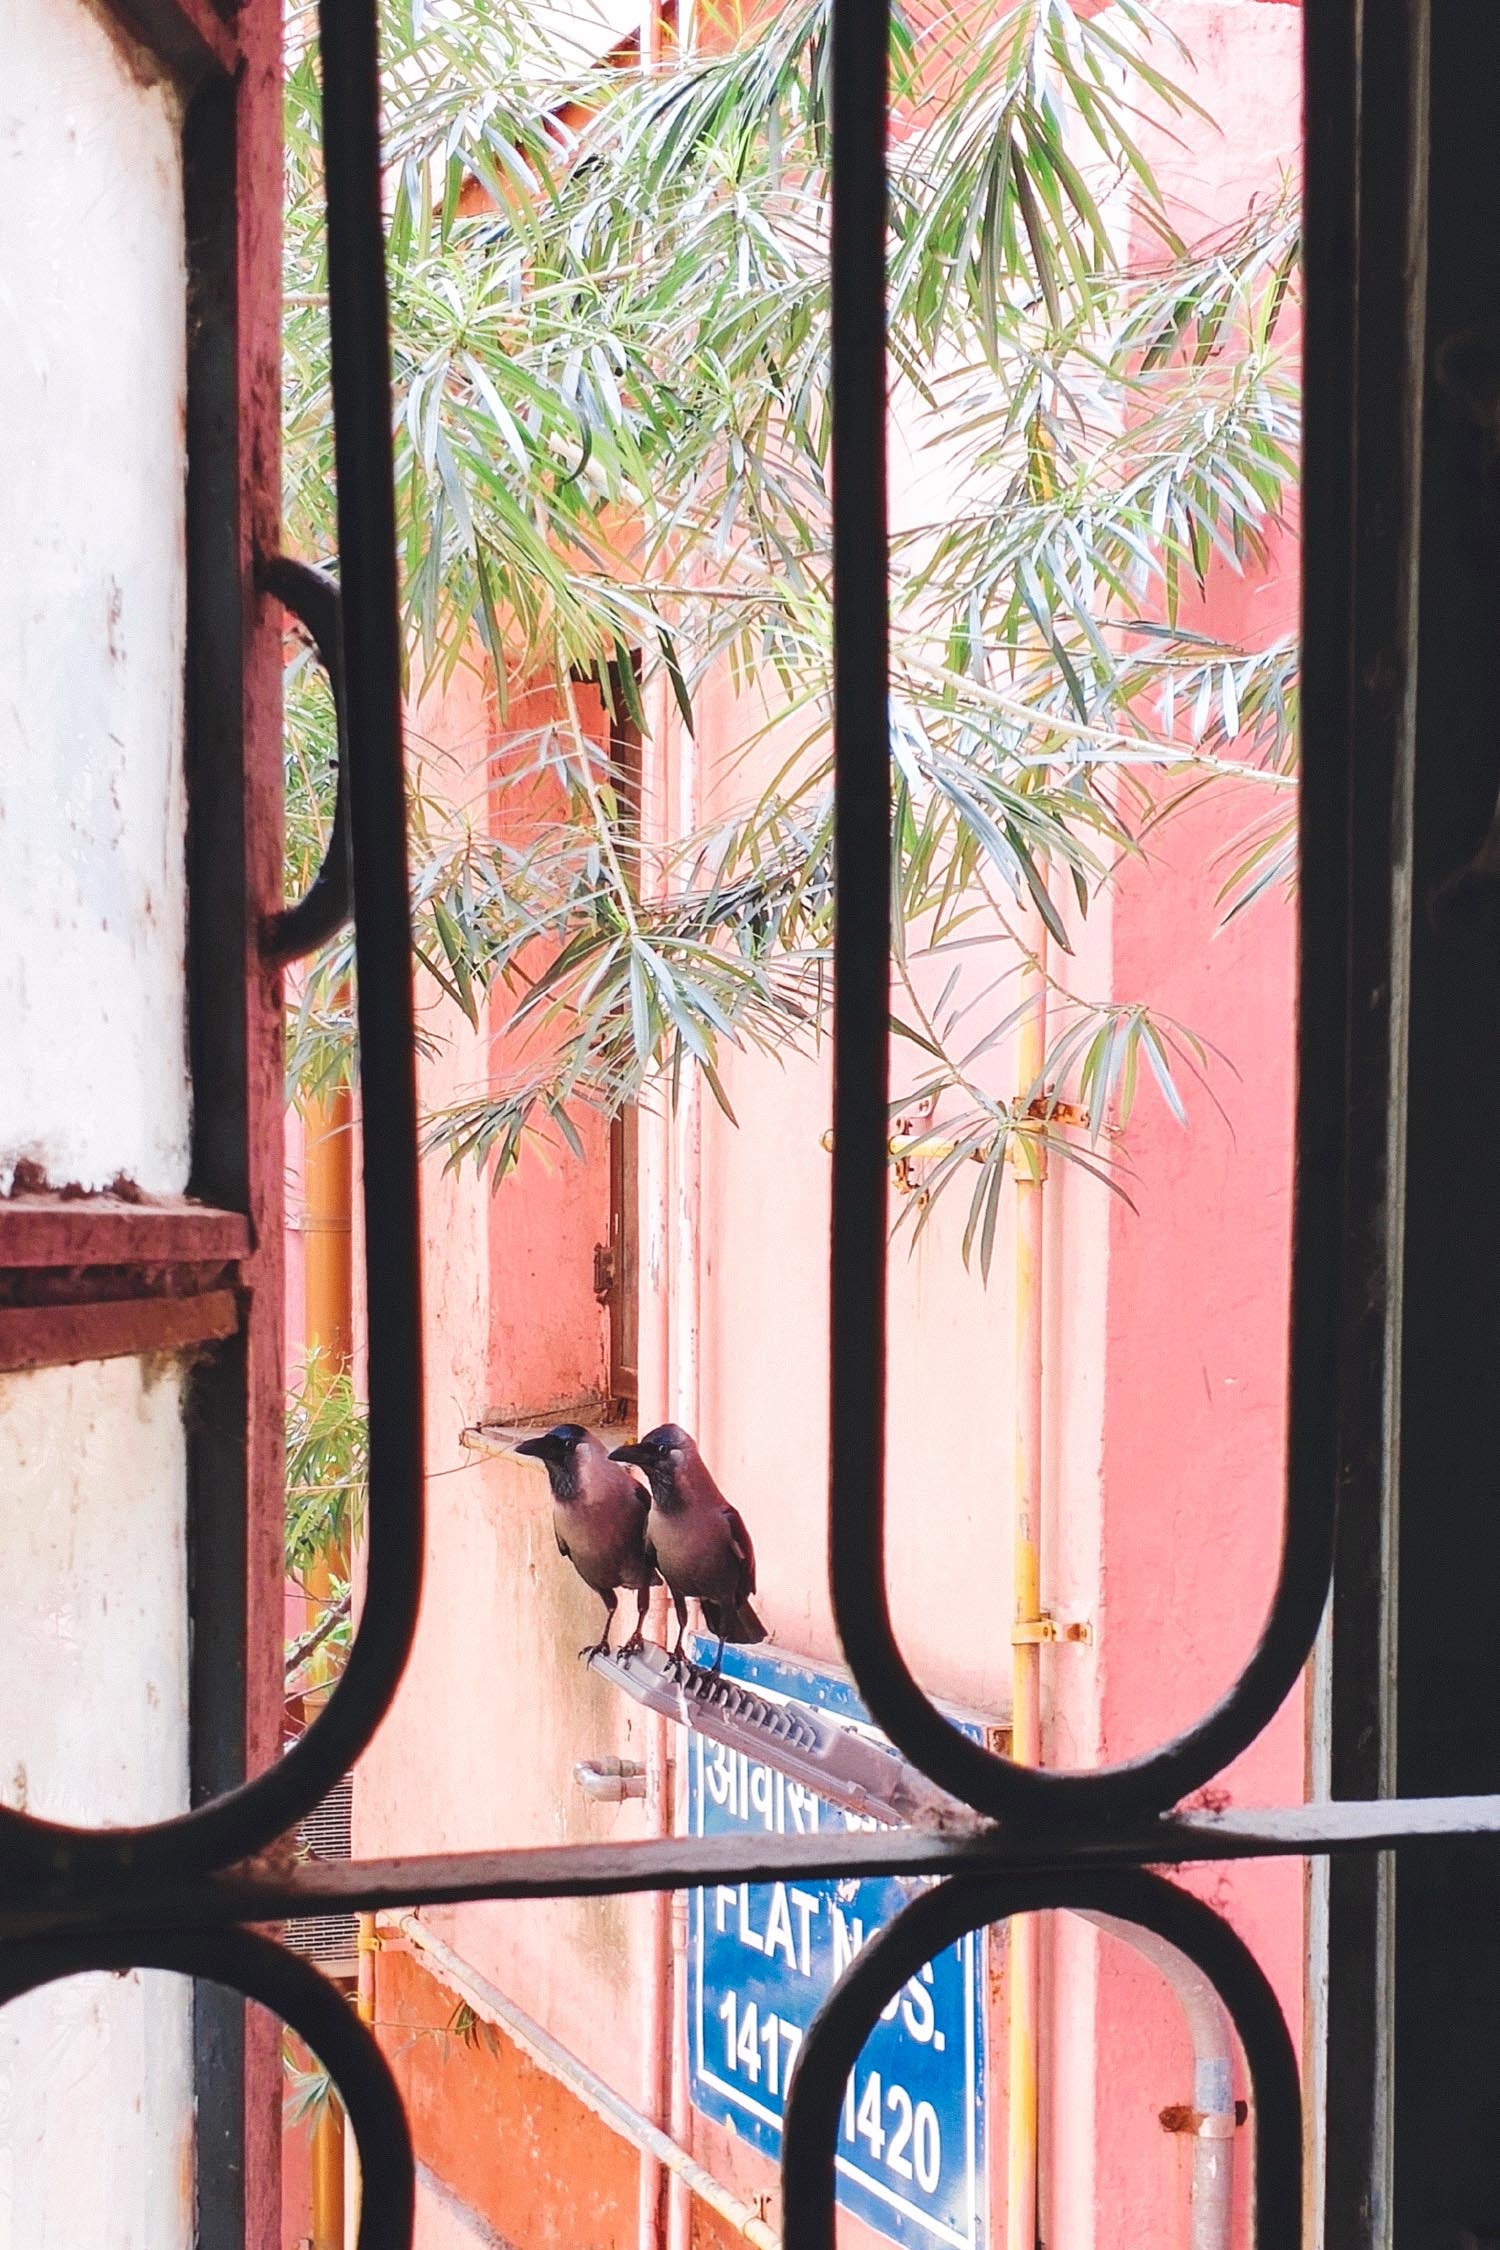 Two birds congregating on a pink building.